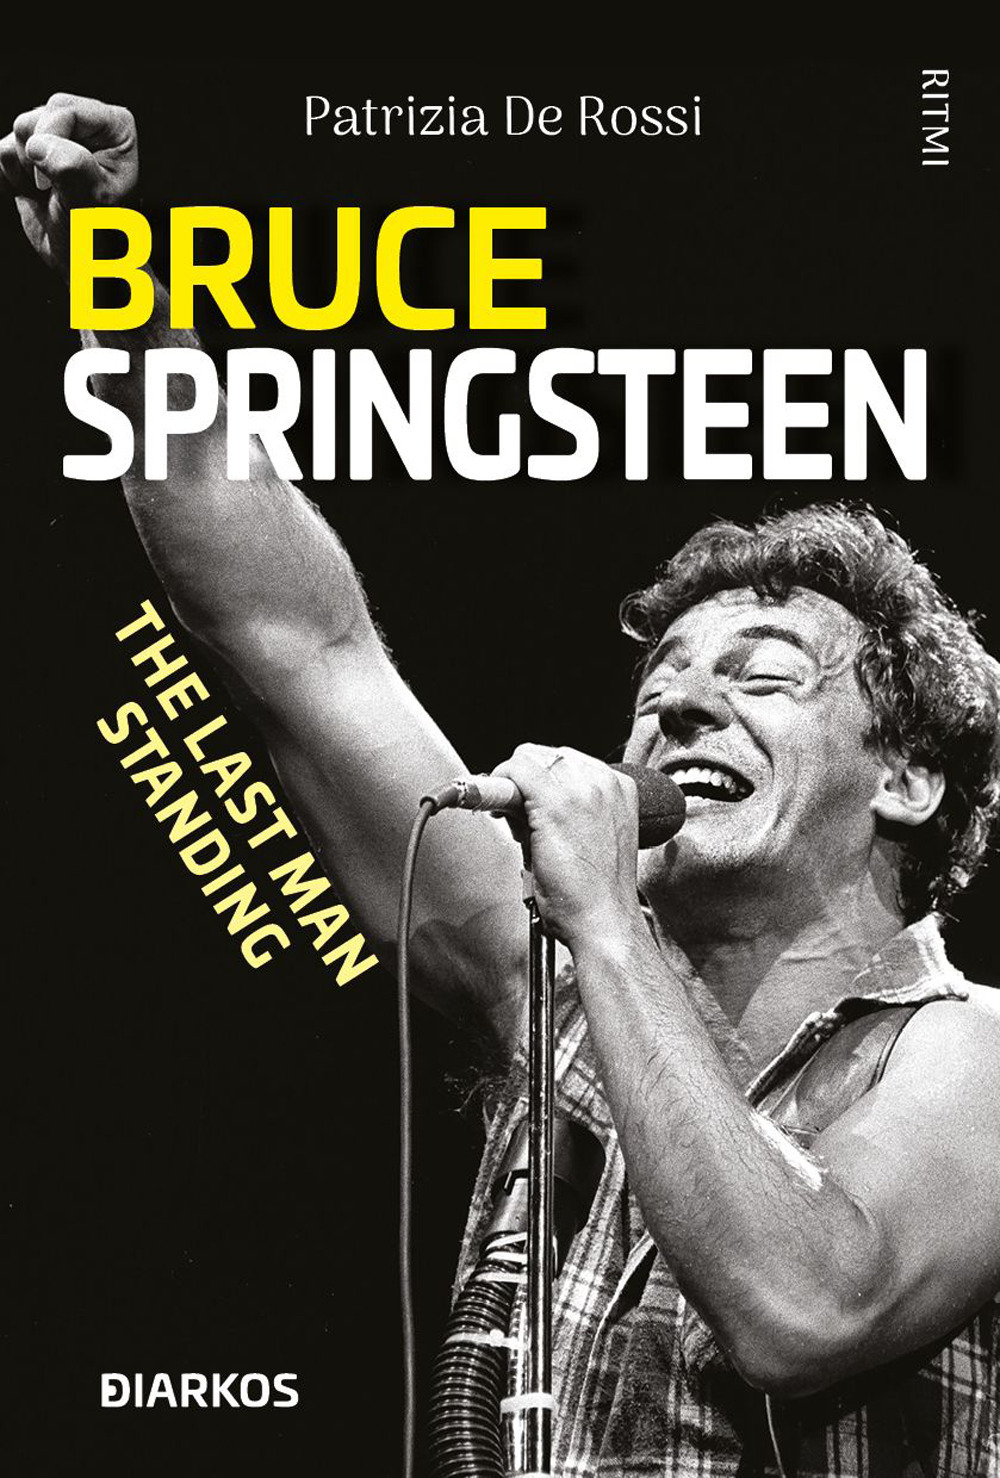 Image of Bruce Springsteen. The last man standing